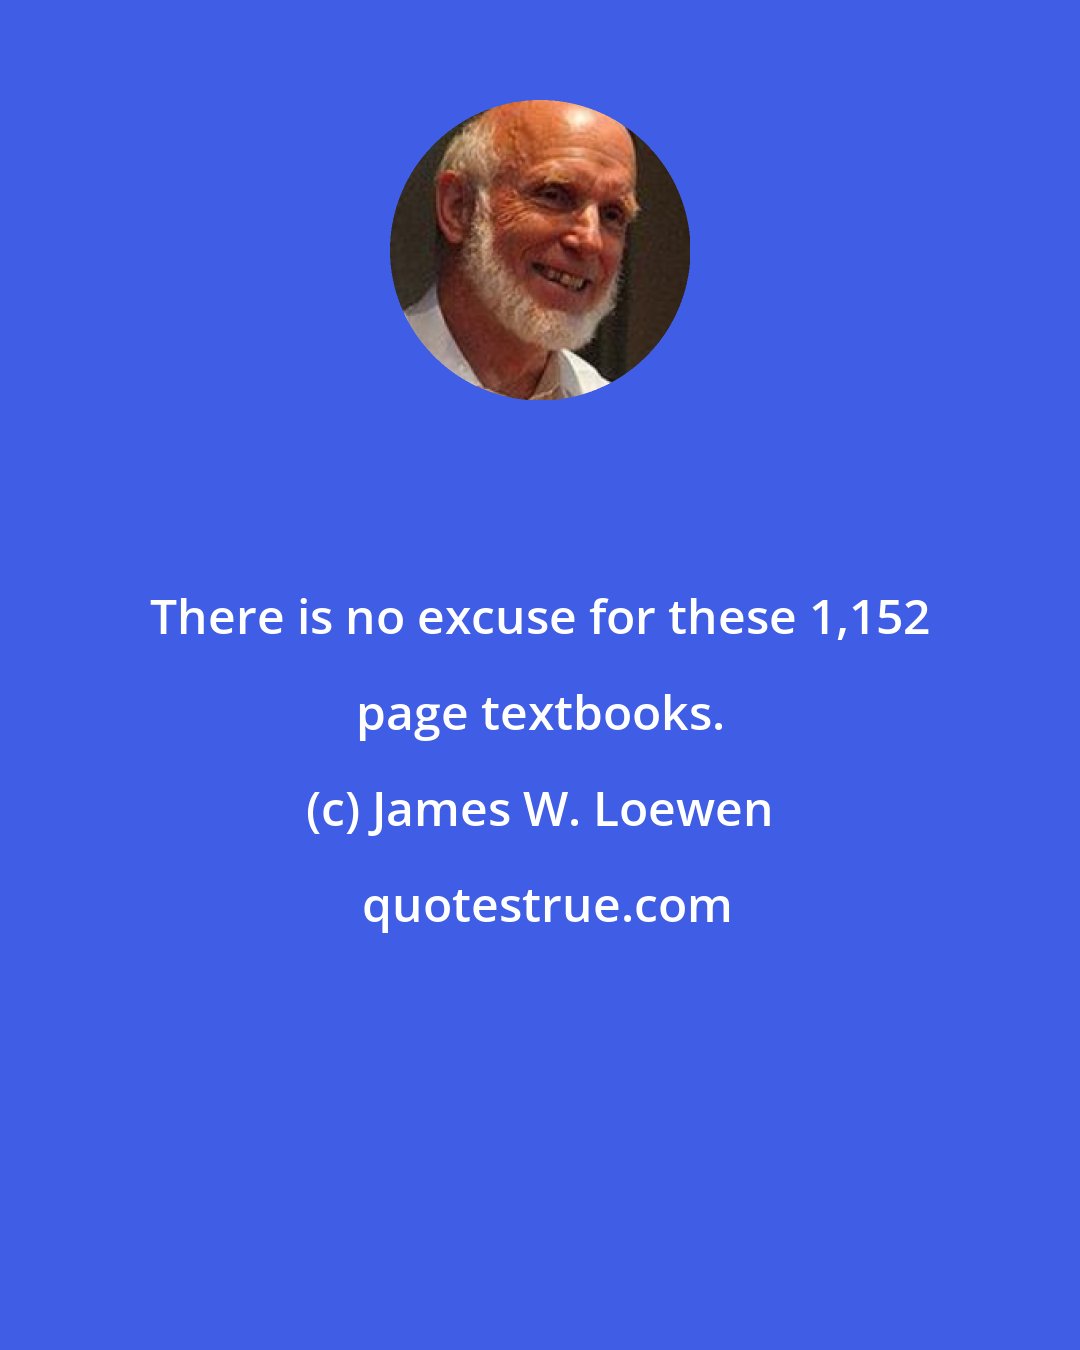 James W. Loewen: There is no excuse for these 1,152 page textbooks.